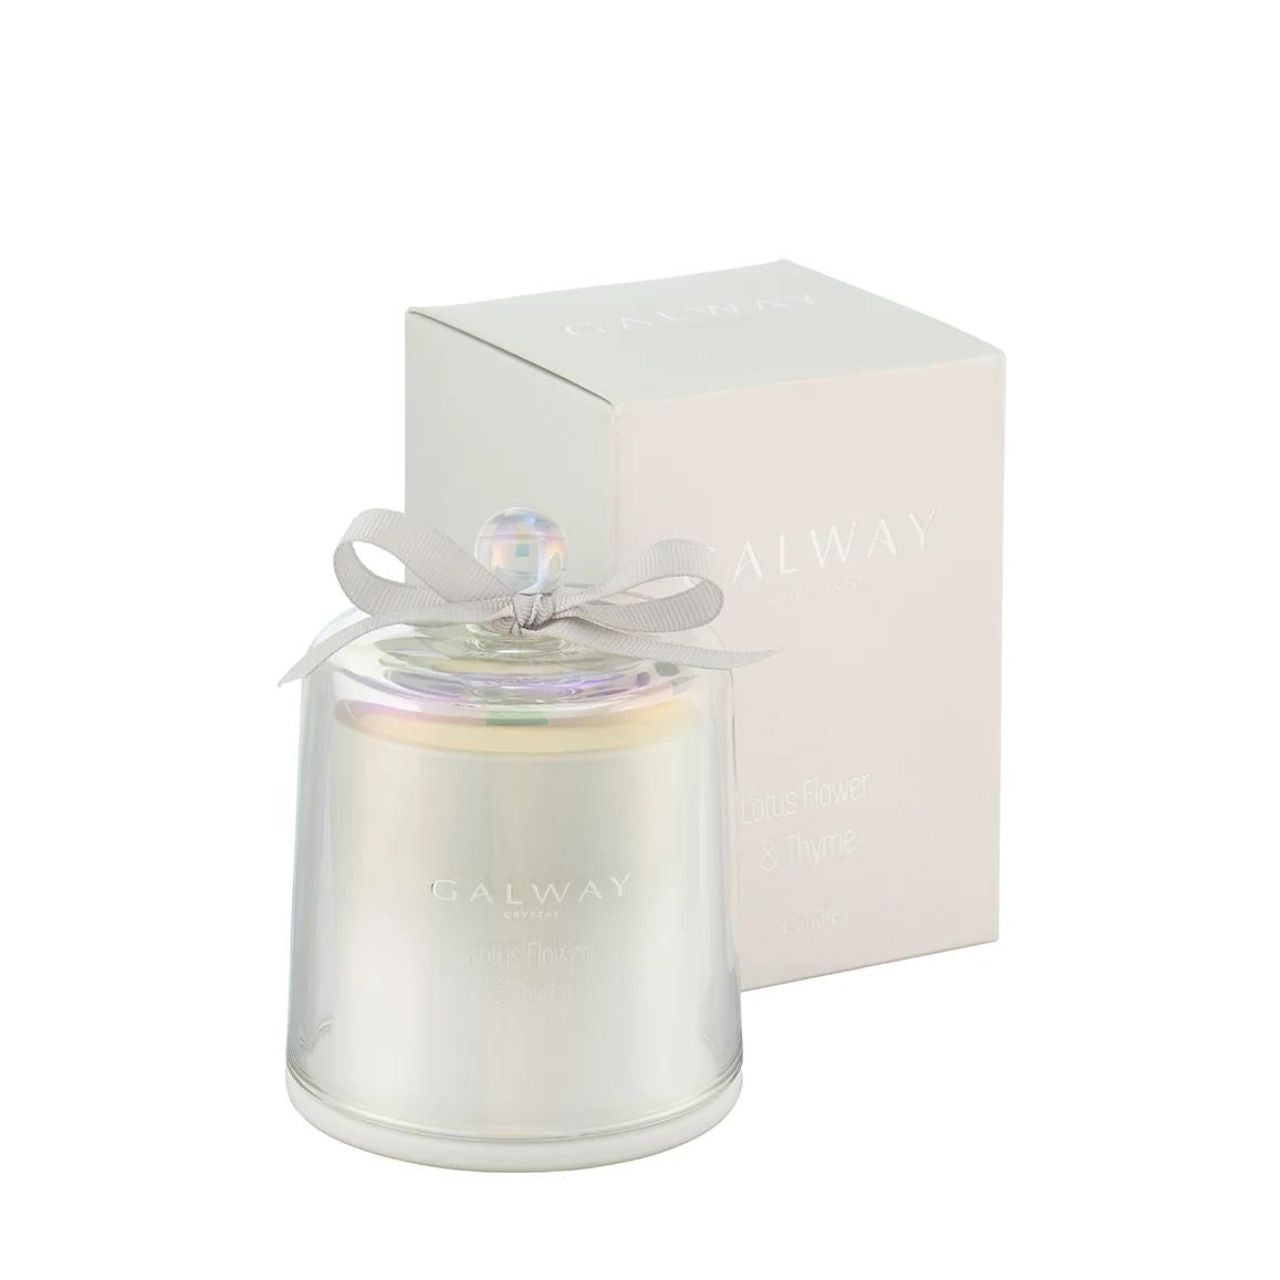 Lotus Flower & Thyme Scented Bell Jar Candle  Transport yourself to a special place with the perfect fragrance for your home. Our Lotus Flower & Thyme scent will transform any room and certainly set the right mood.